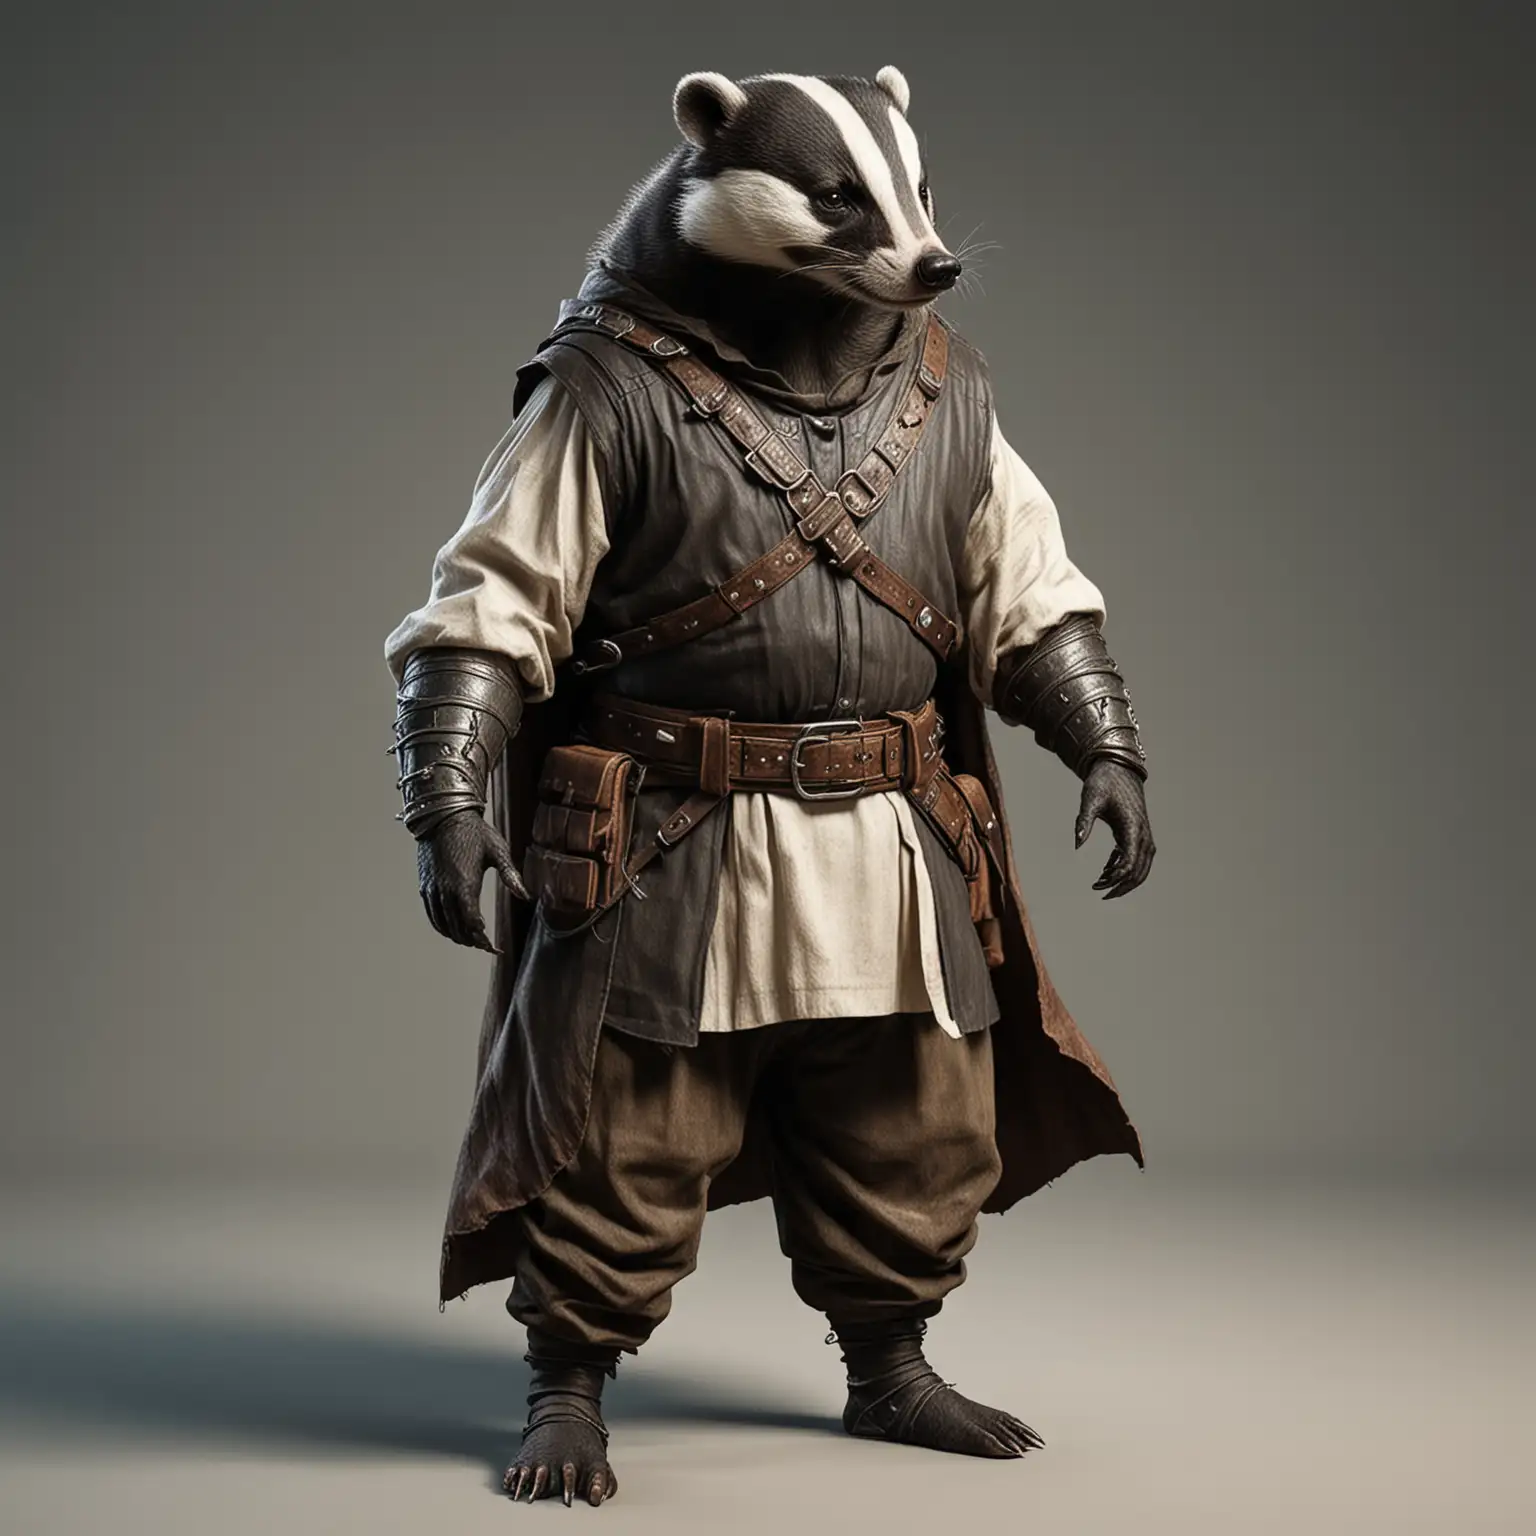 Realistic BadgerWarrior in Medieval Tunic and Wide Pants Standing Tall